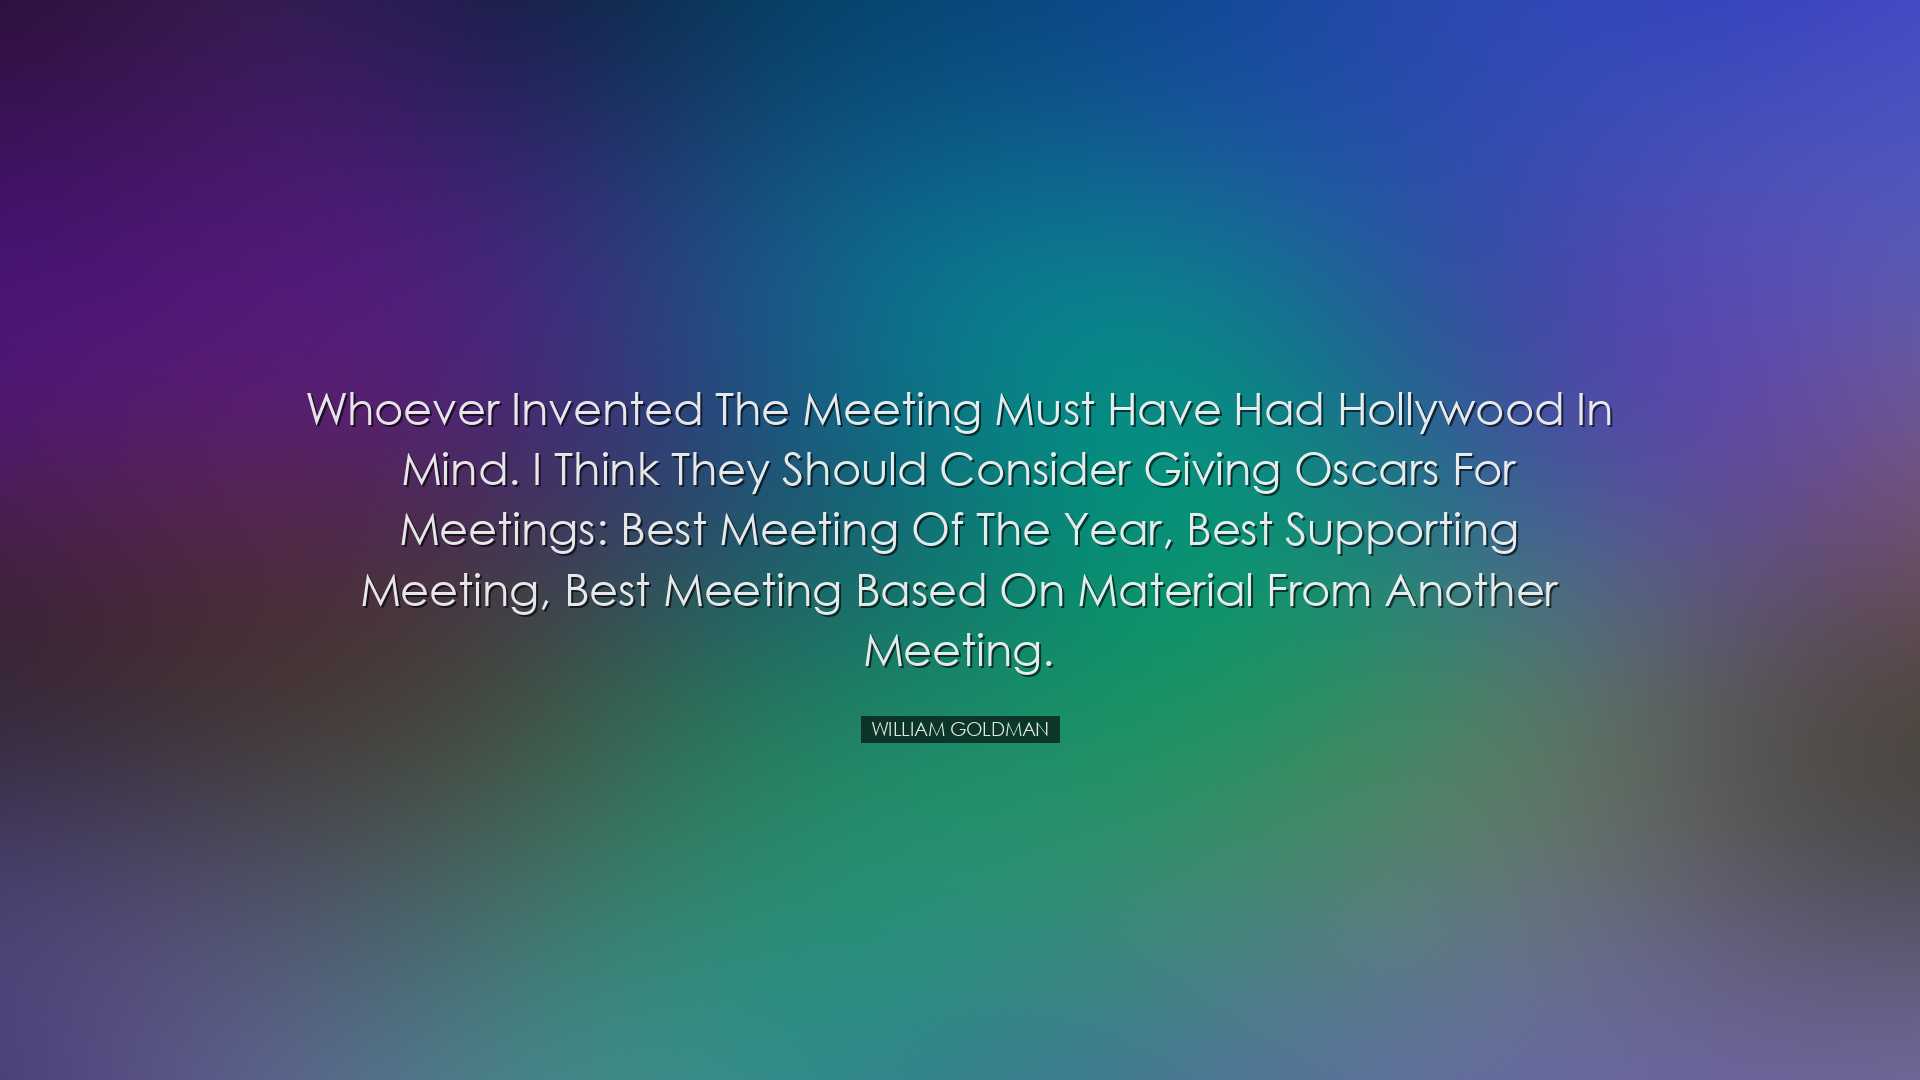 Whoever invented the meeting must have had Hollywood in mind. I th